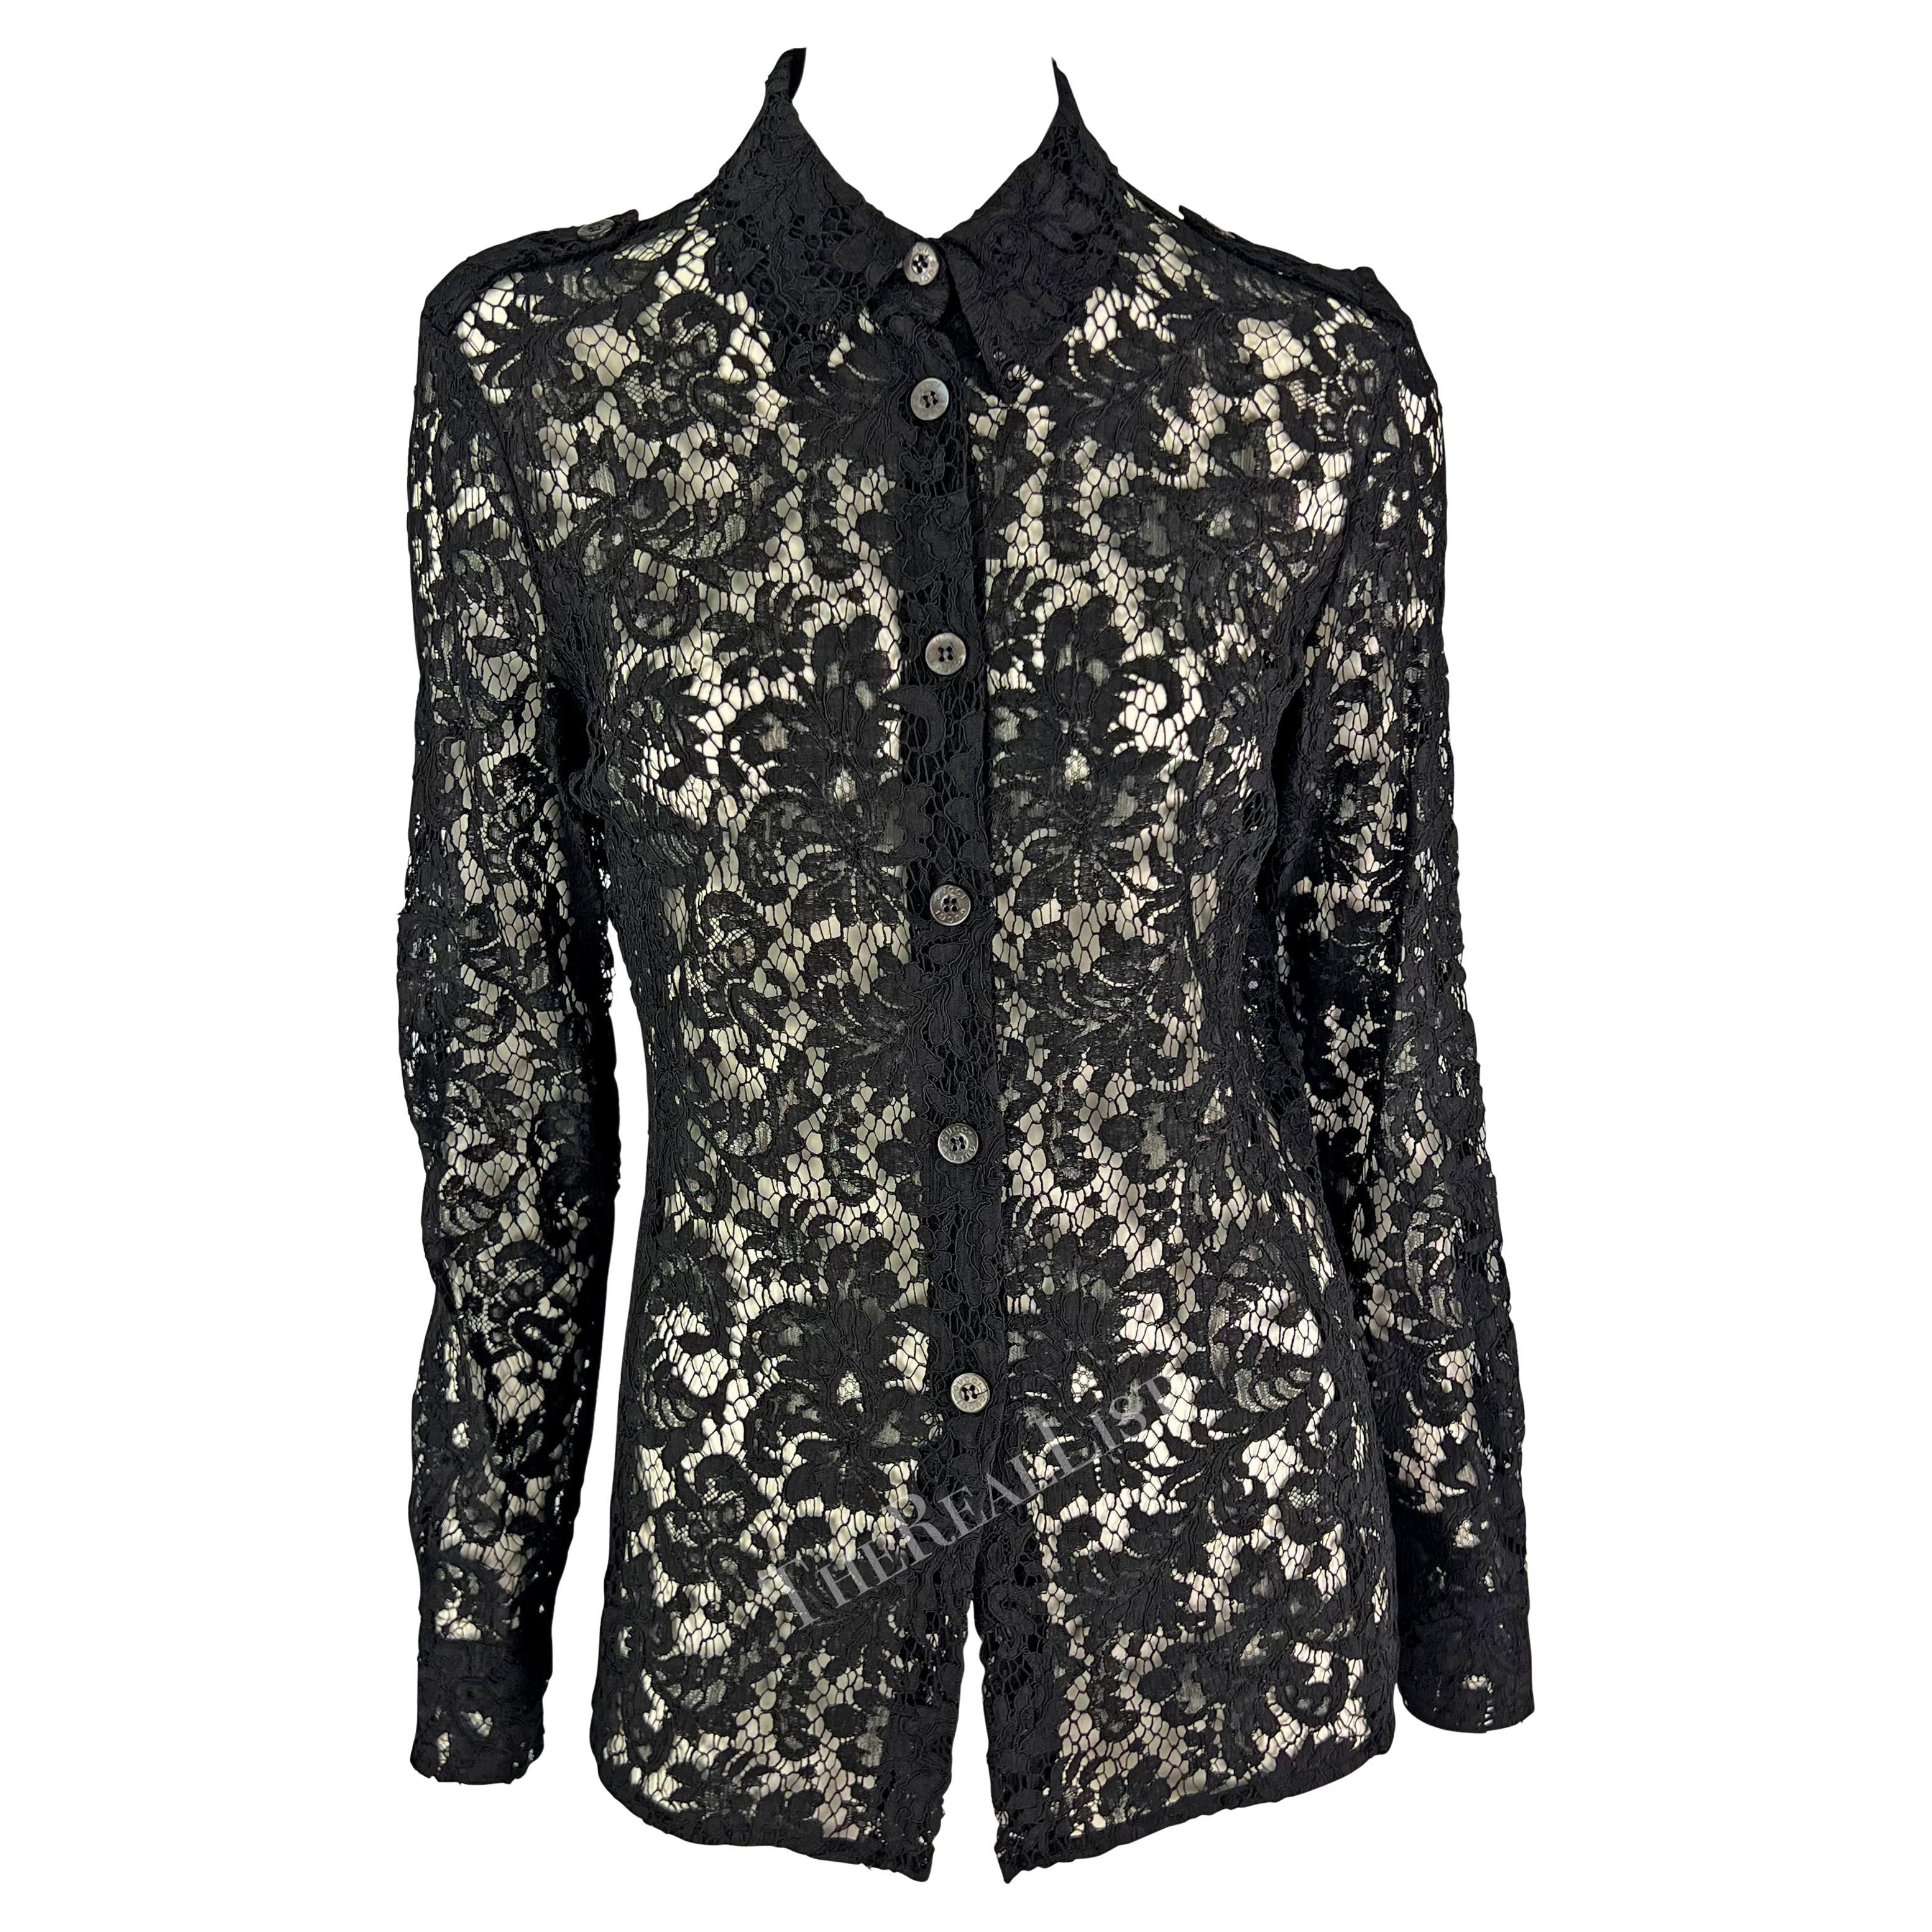 S/S 1996 Gucci by Tom Ford Sheer Black Lace Button Up Shirt For Sale